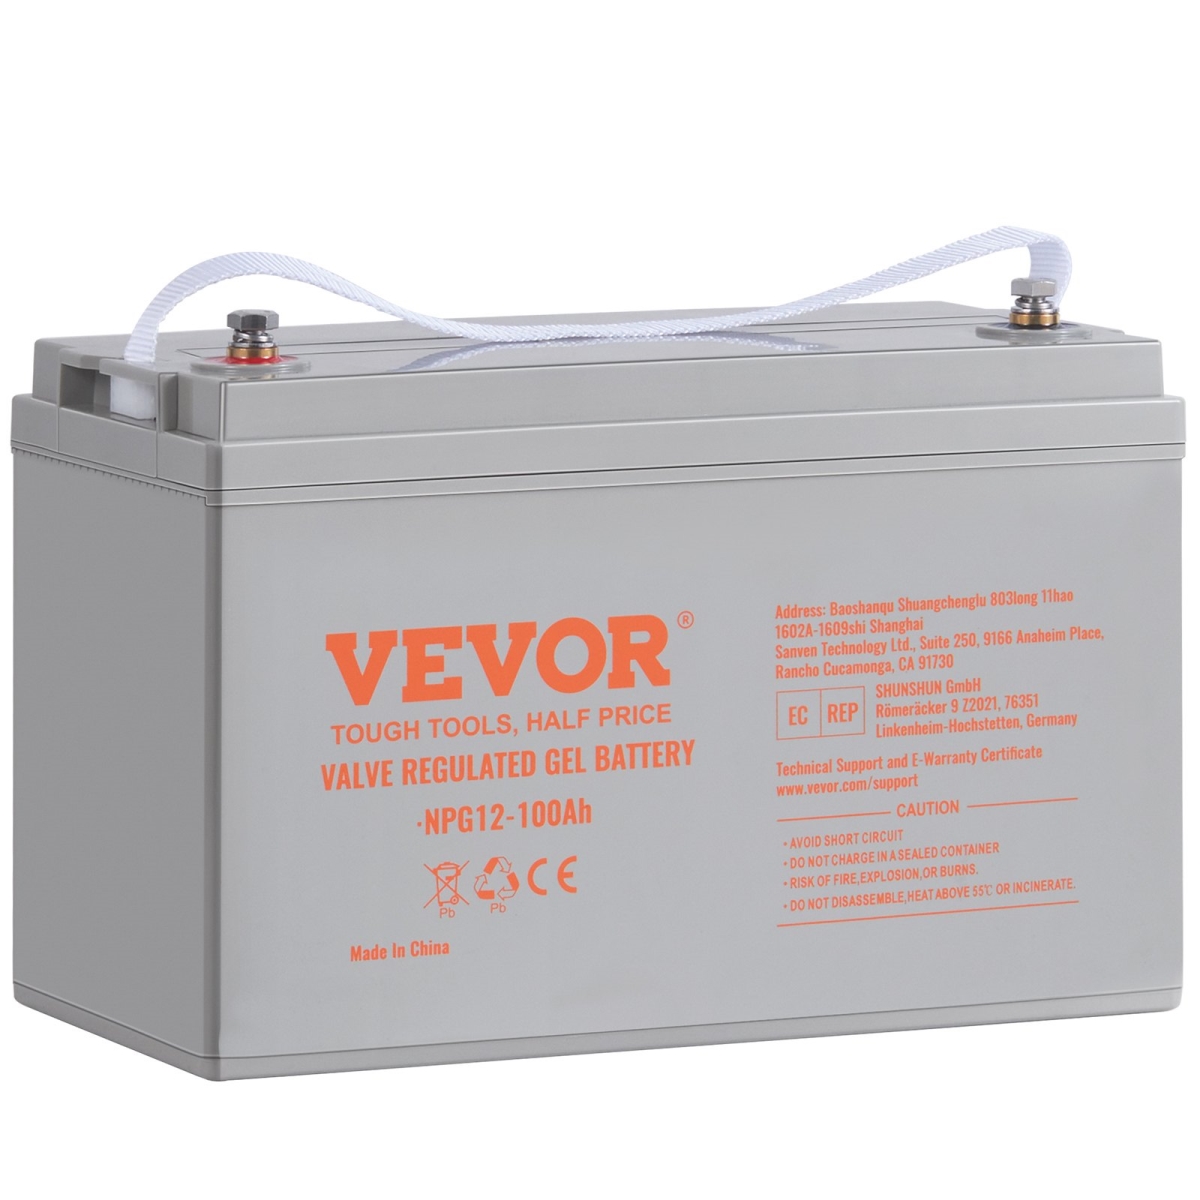 Picture of Vevor SXHDCQSDCFKSMHOVCV9 12V 100 AH Deep Cycle Battery